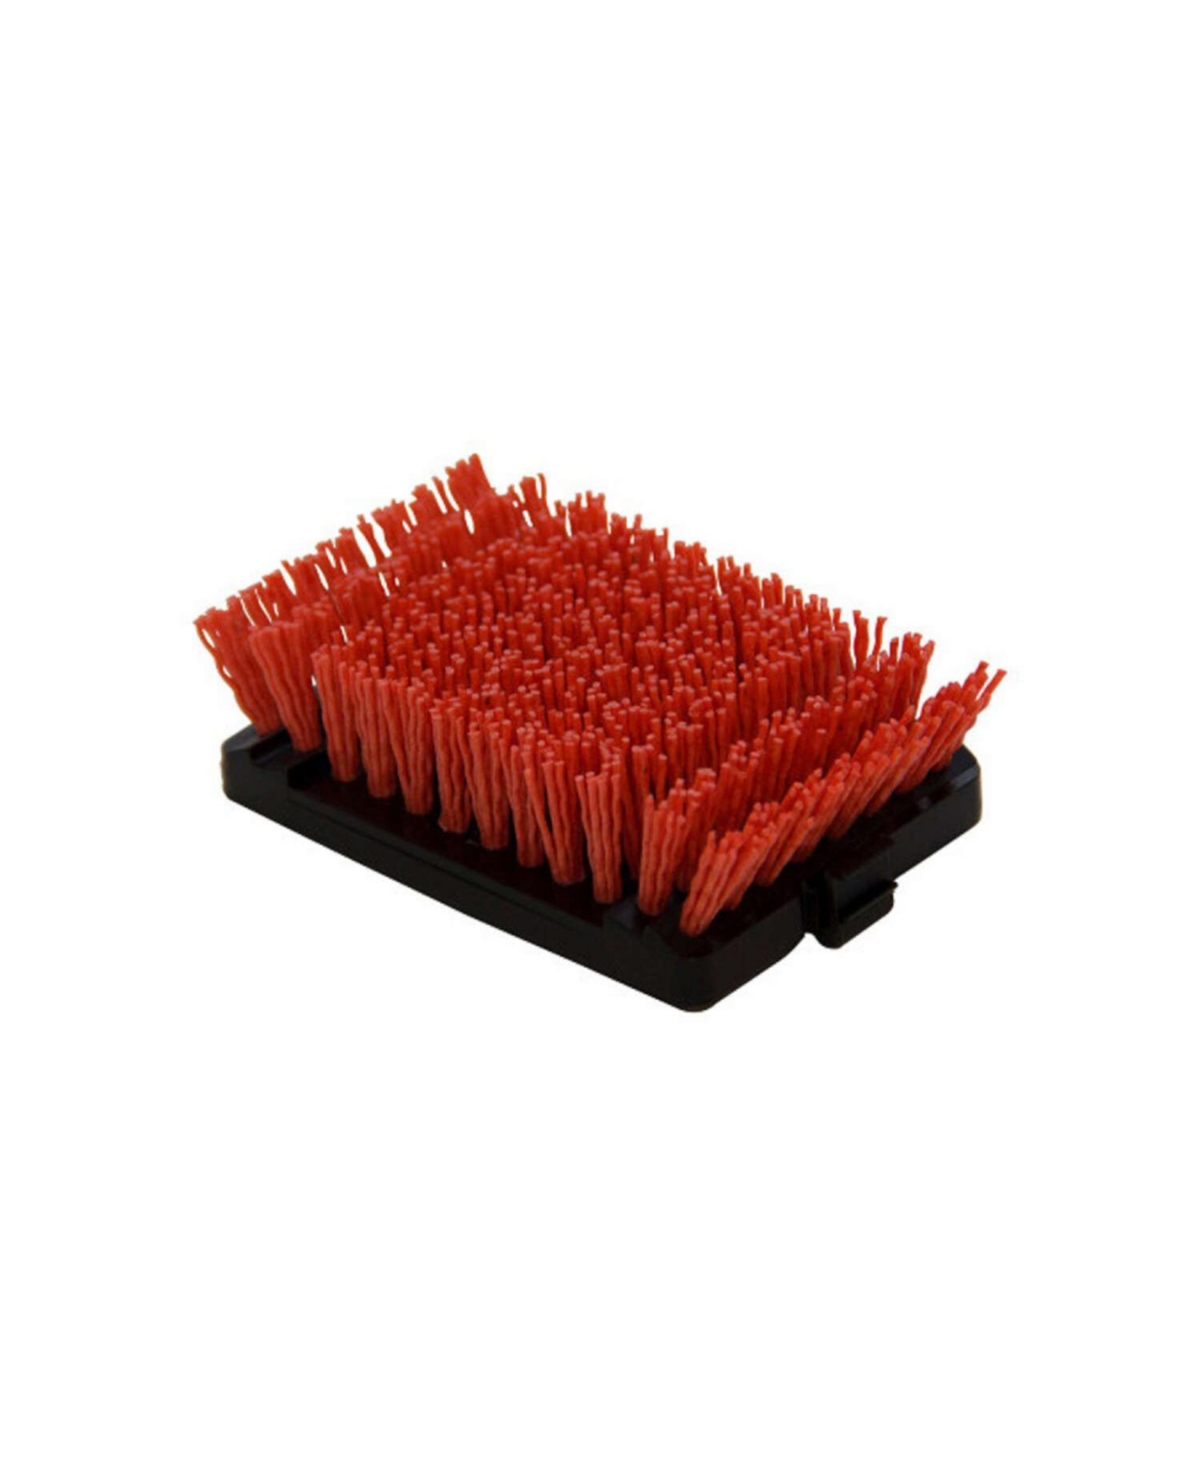 8011444 Cool-Clean Polypropylene Replacement Grill Brush Head, Black & Red - Black